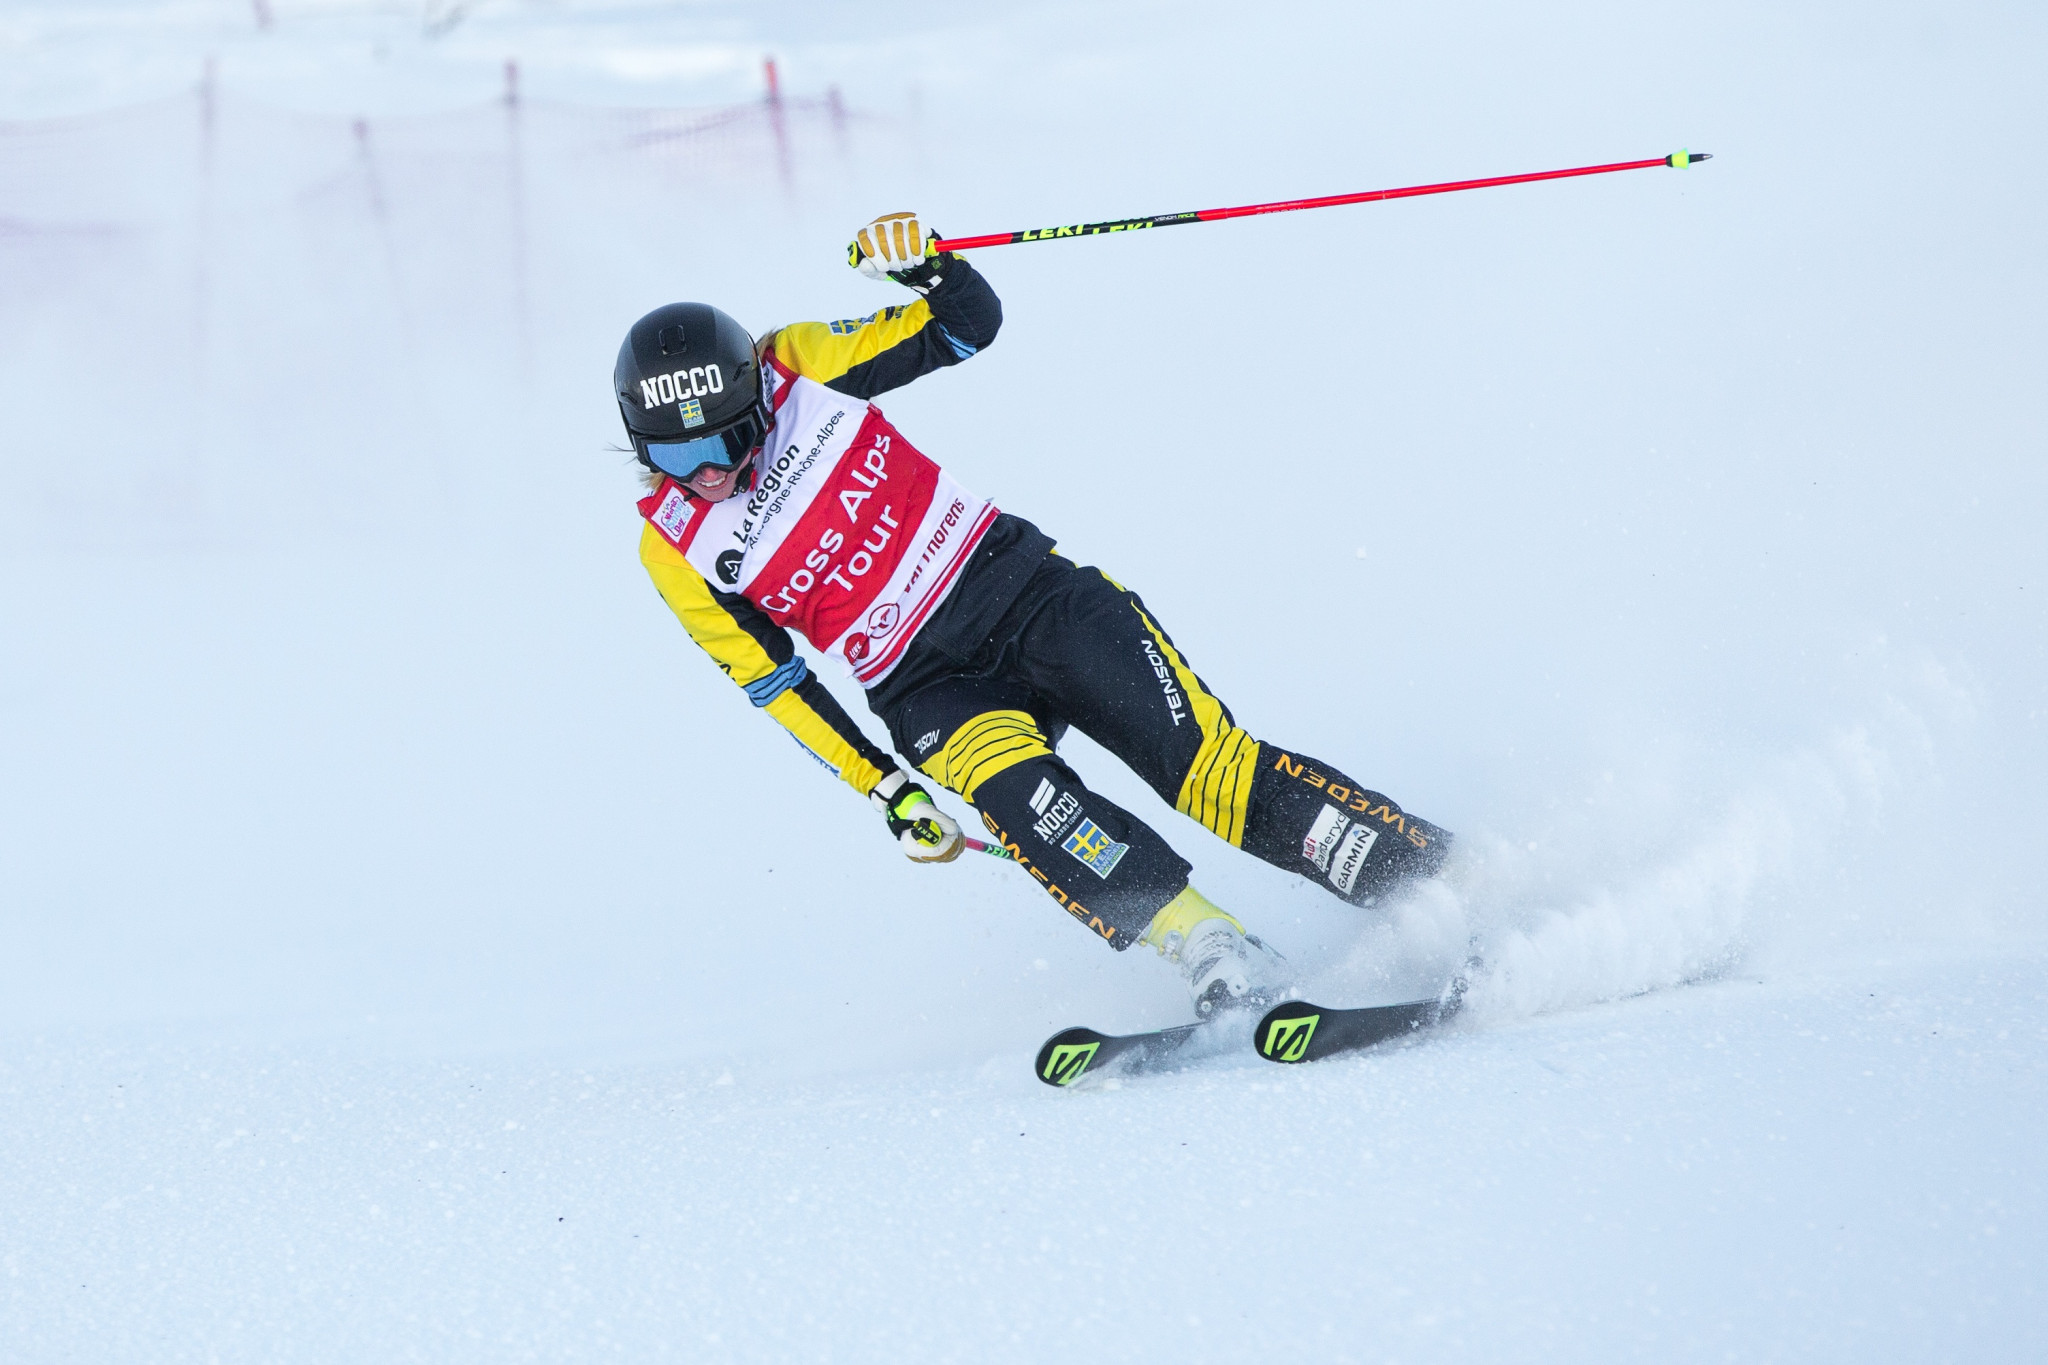 Sweden's Sandra Naeslund currently leads the women's Ski Cross World Cup standings ©Getty Images